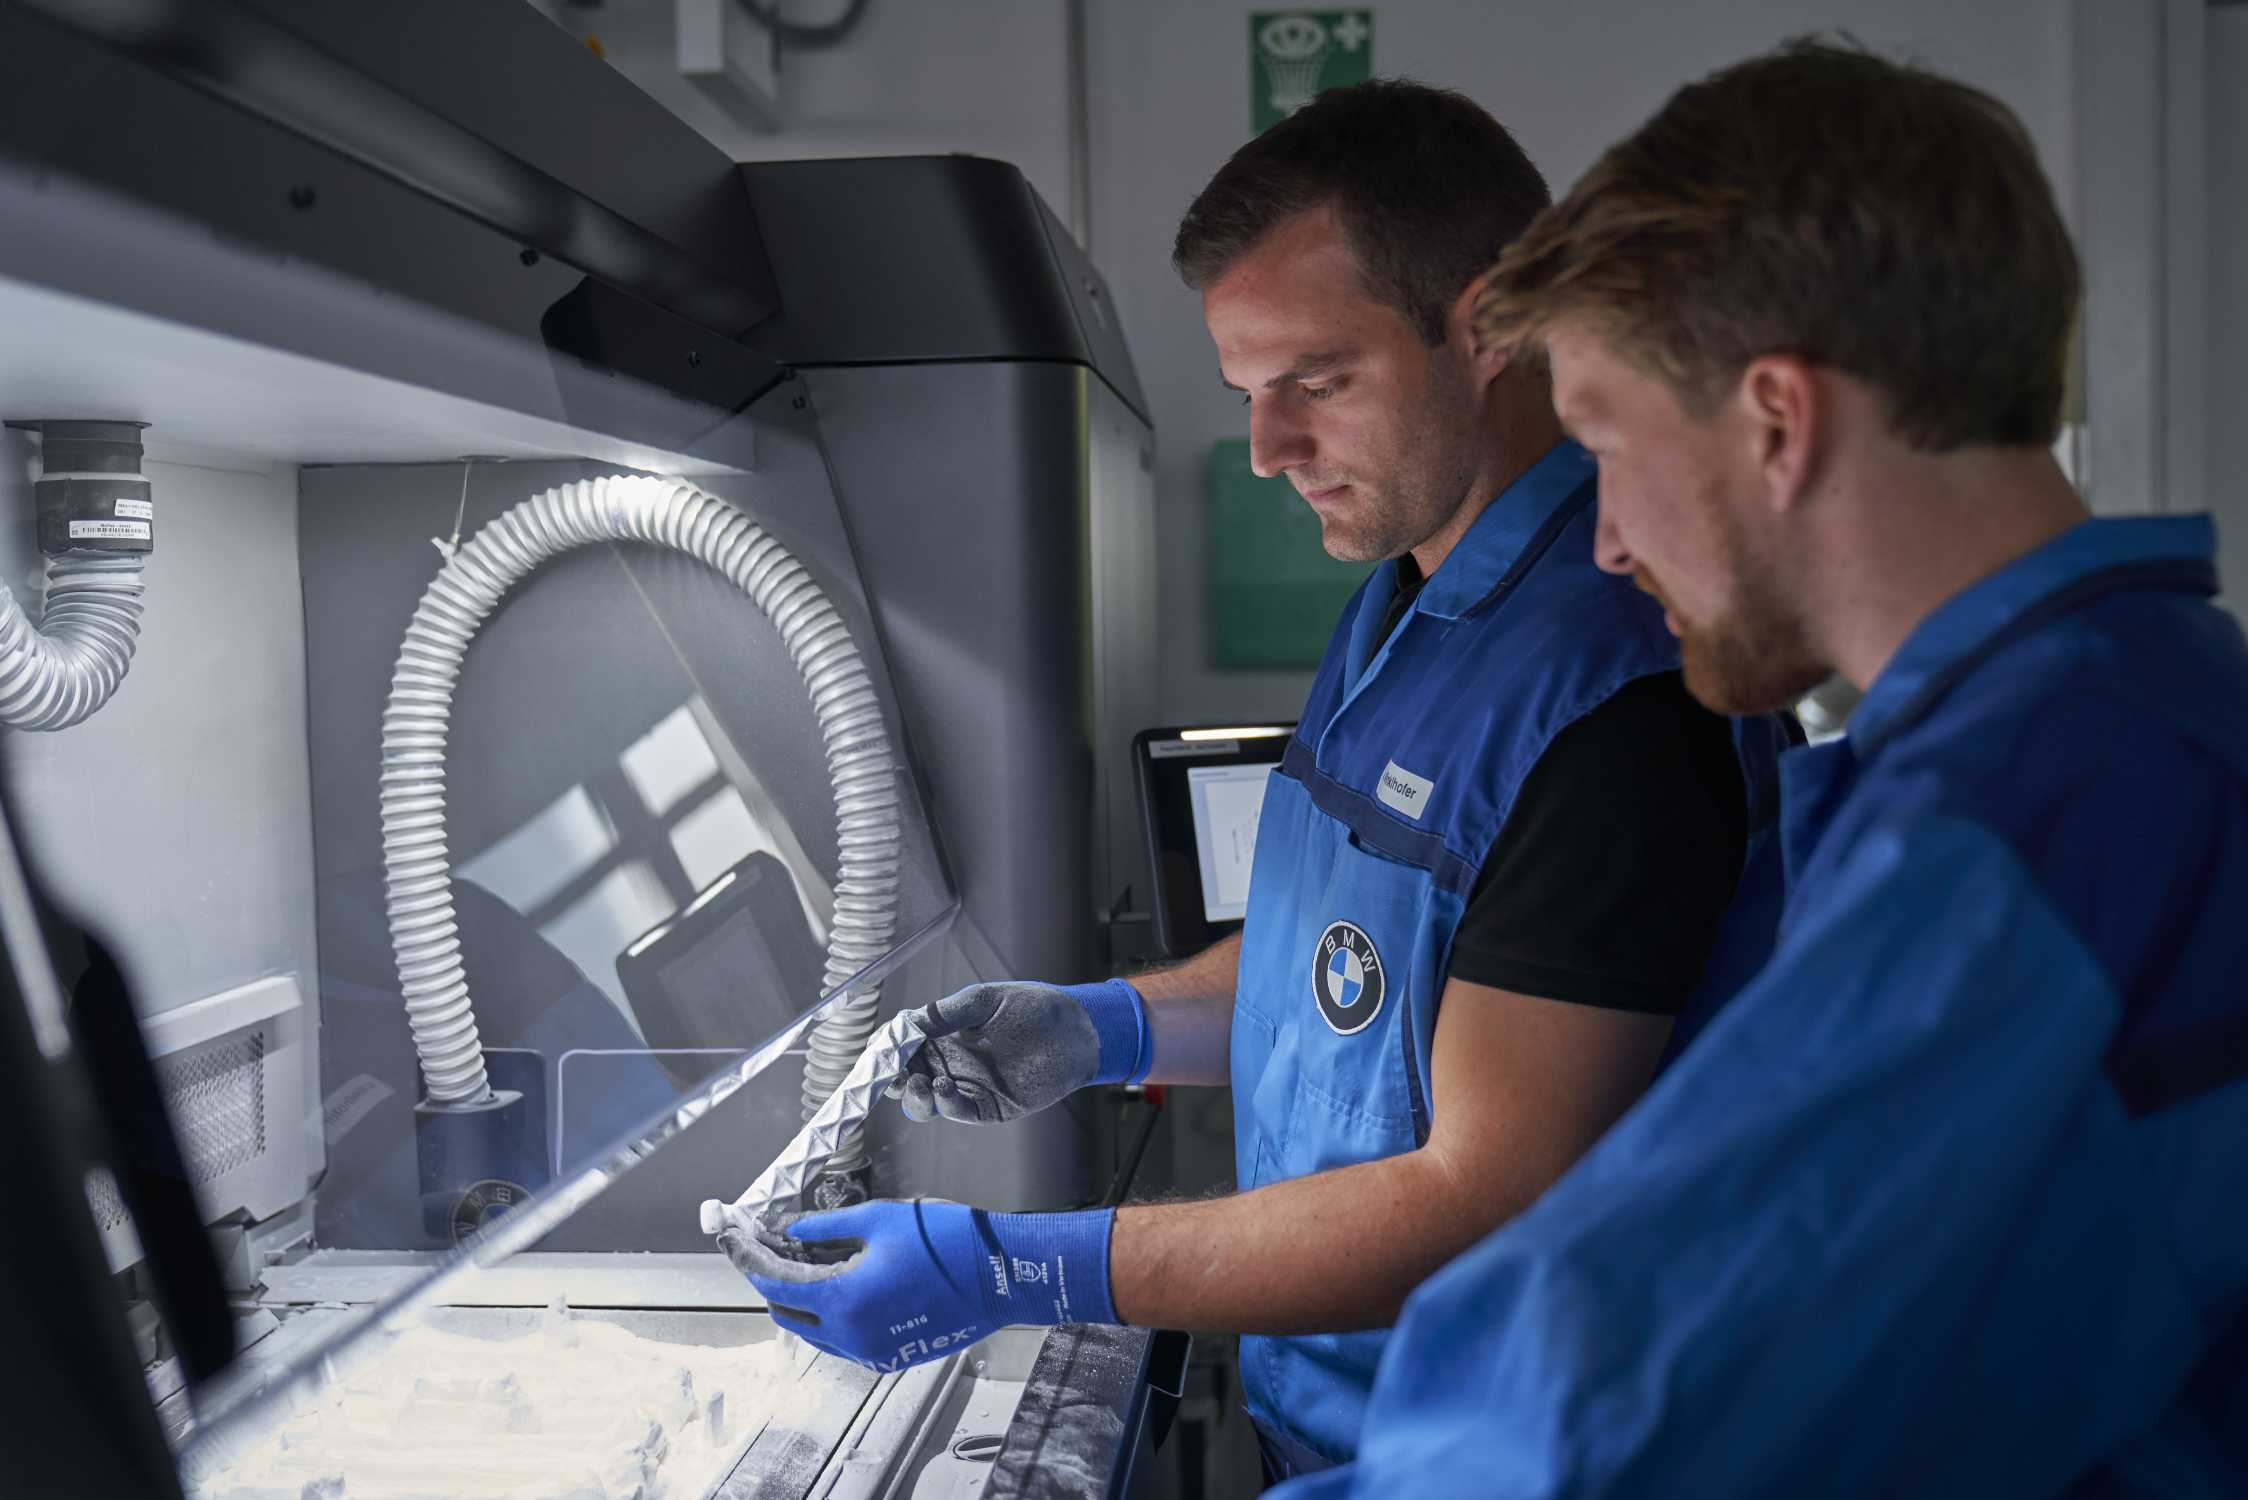 A million printed components in just years: BMW Group makes increasing use of 3D printing